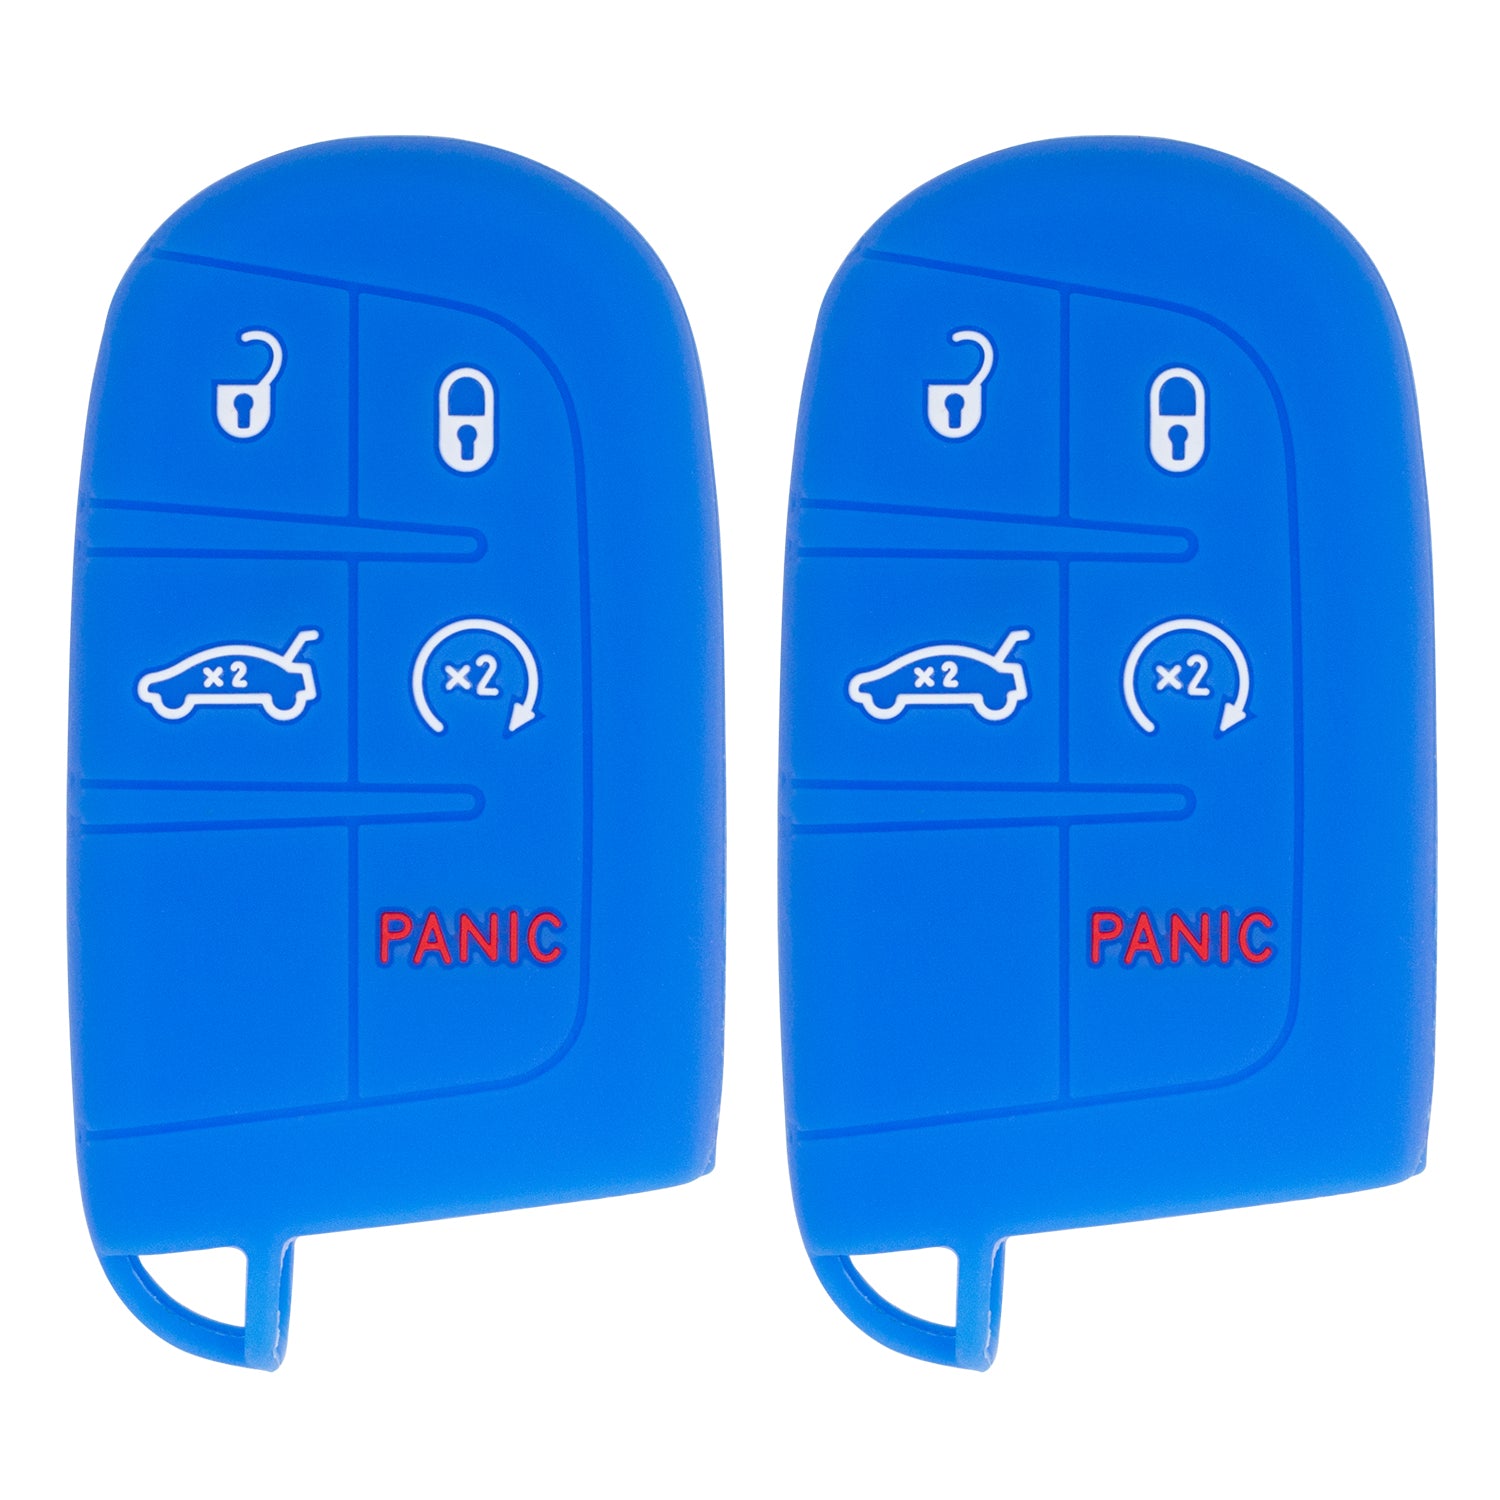 Silicone Case for Keyless Entry Smart Key fob for Jeep Grand Cherokee Compass Journey Durango (Double Blue)